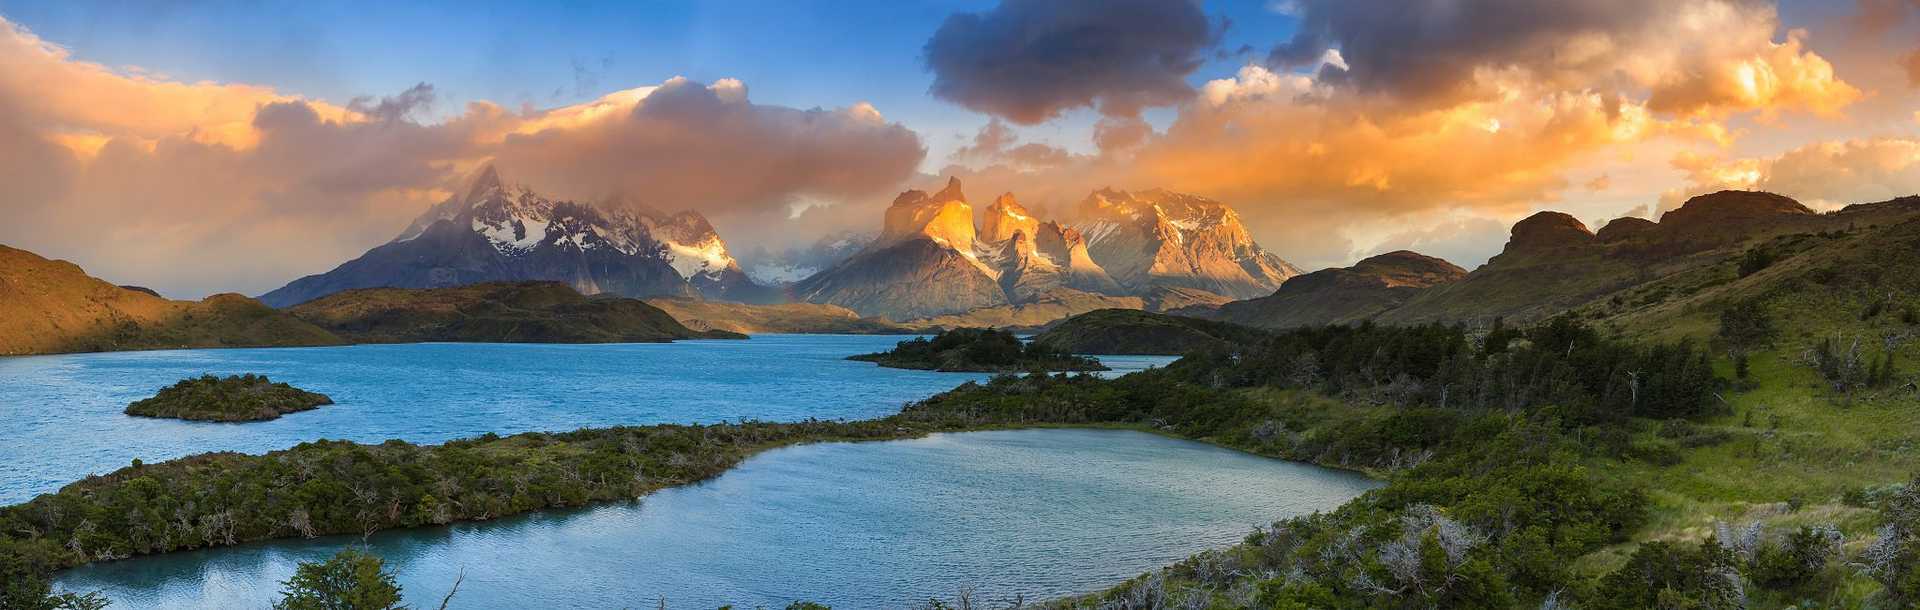 South America Tour - Mountain Views in Torres del Paine, Patagonia